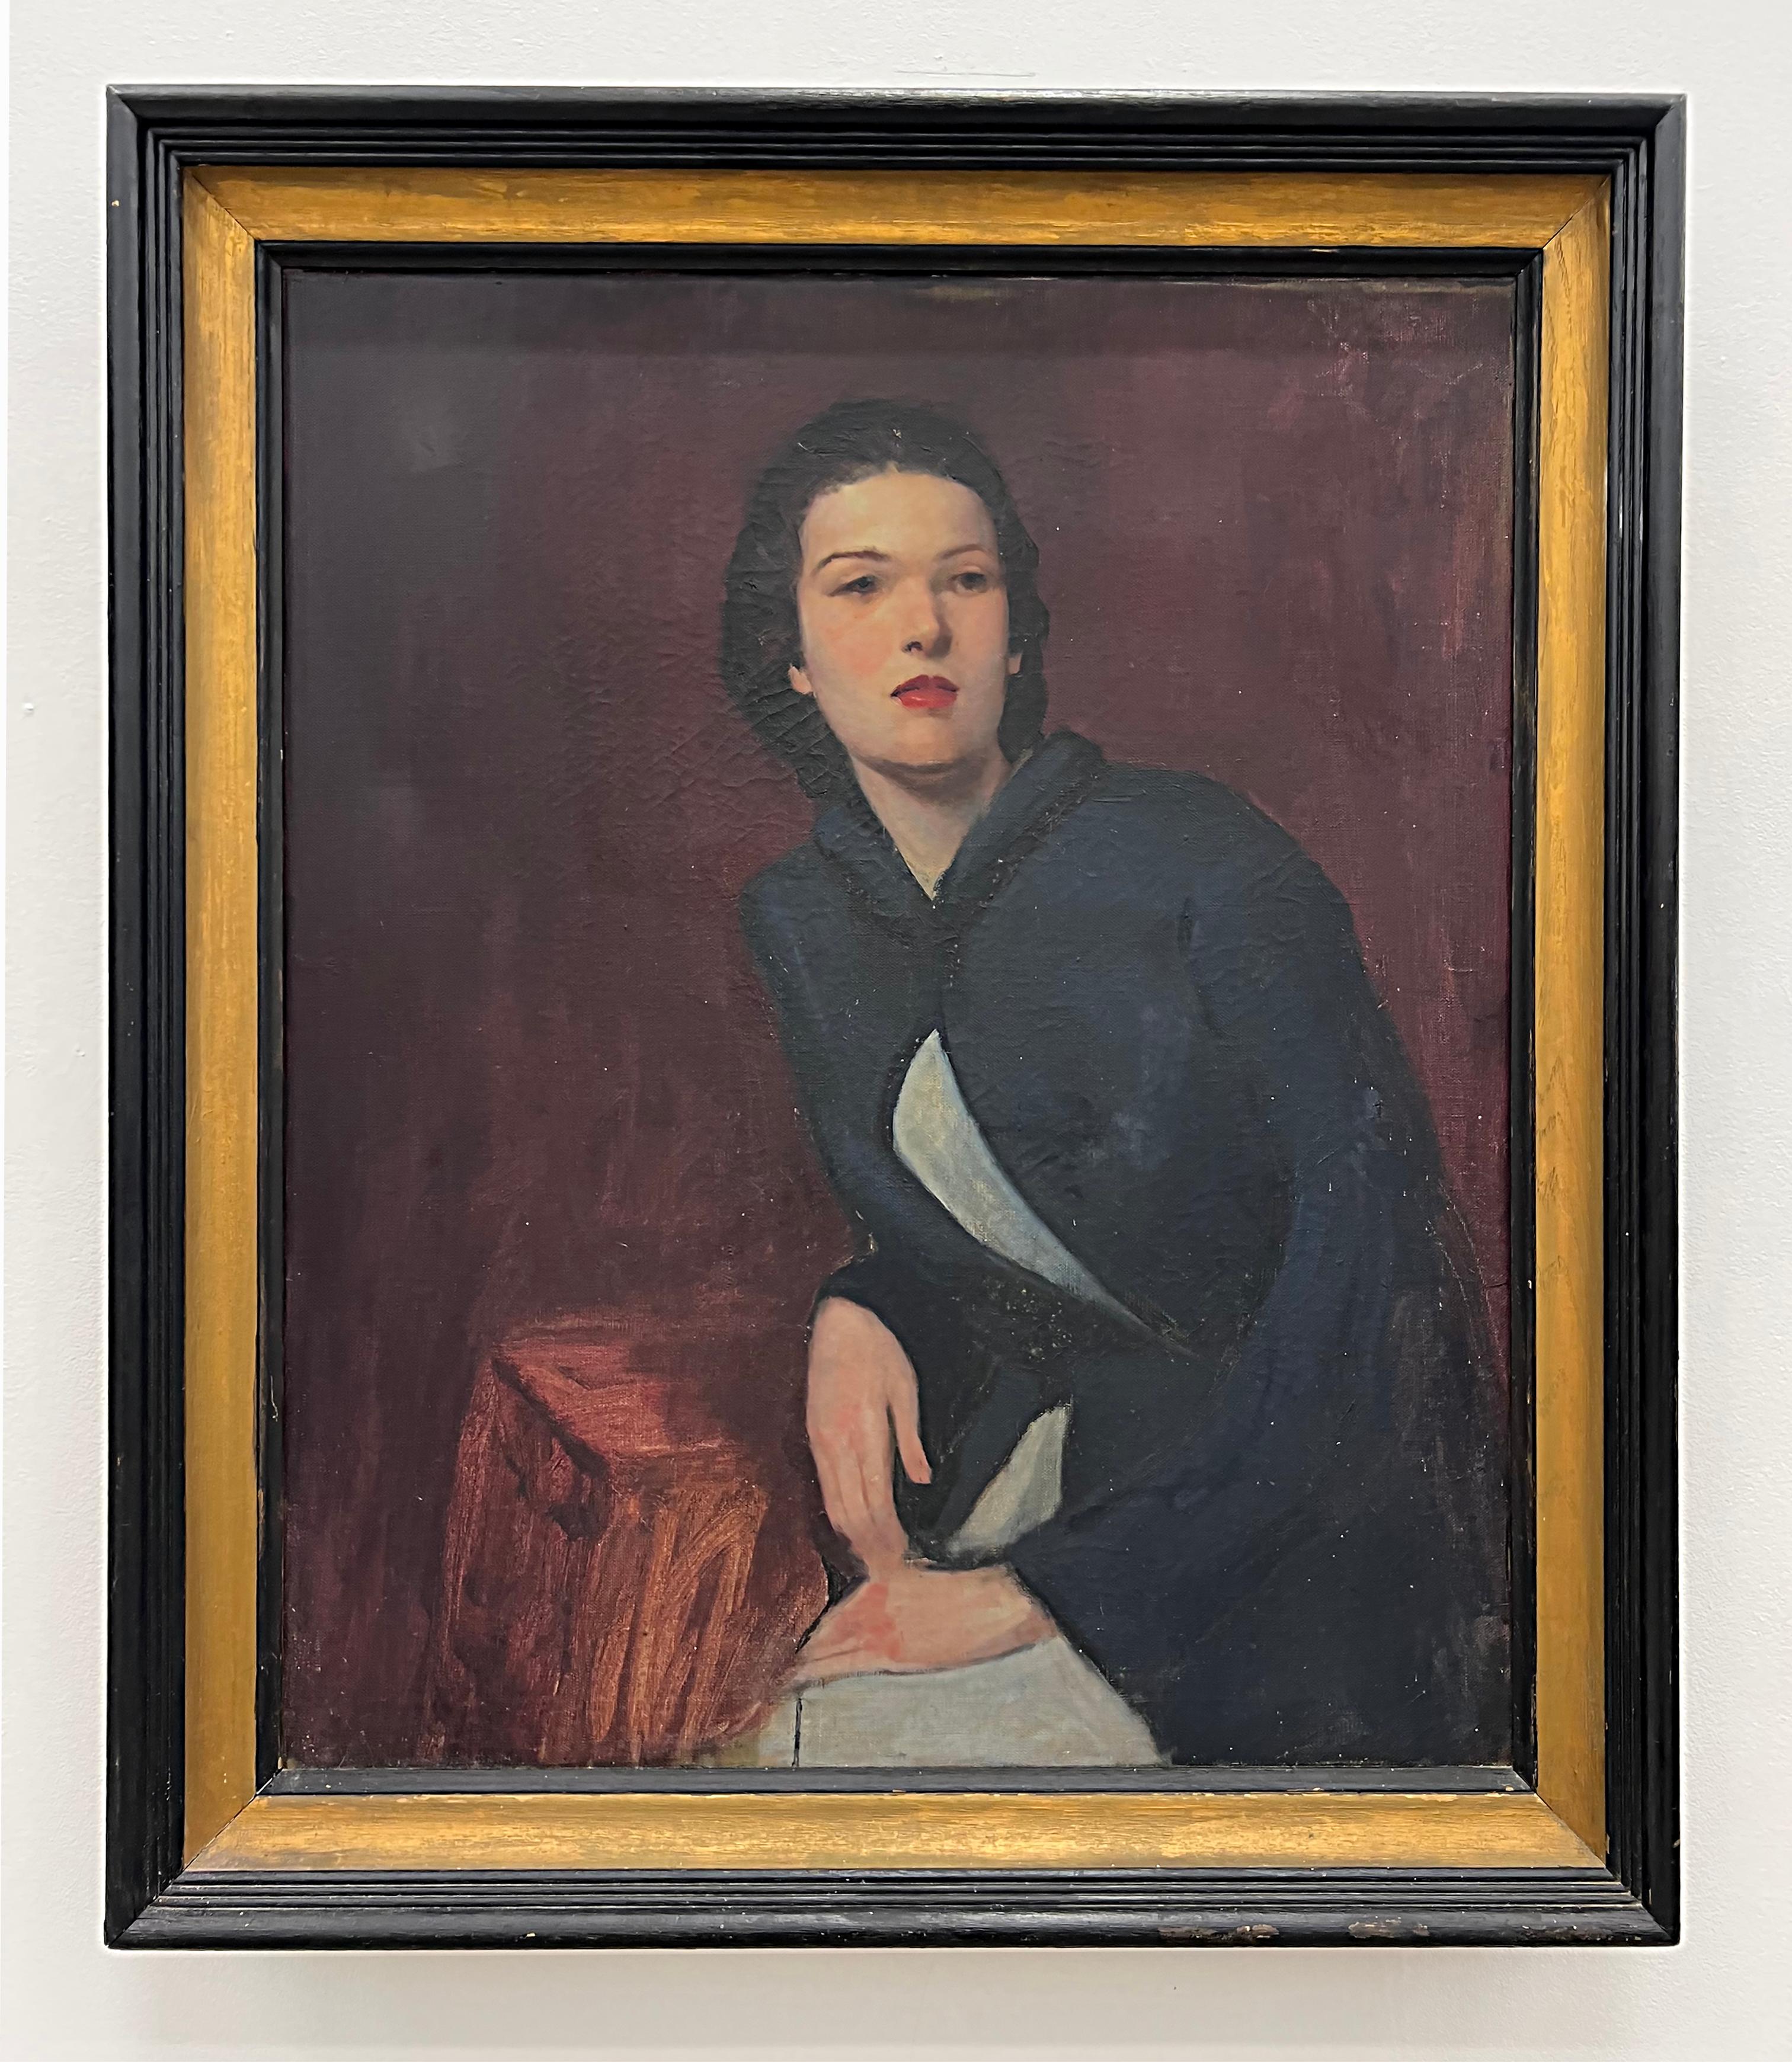 Vintage 1940s oil painting portrait of a seated woman framed, signed

Offered for sale is a vintage 1940s oil painting portrait of a seated woman. The painting has a vintage patina and is displayed in the original black and gold painted molded